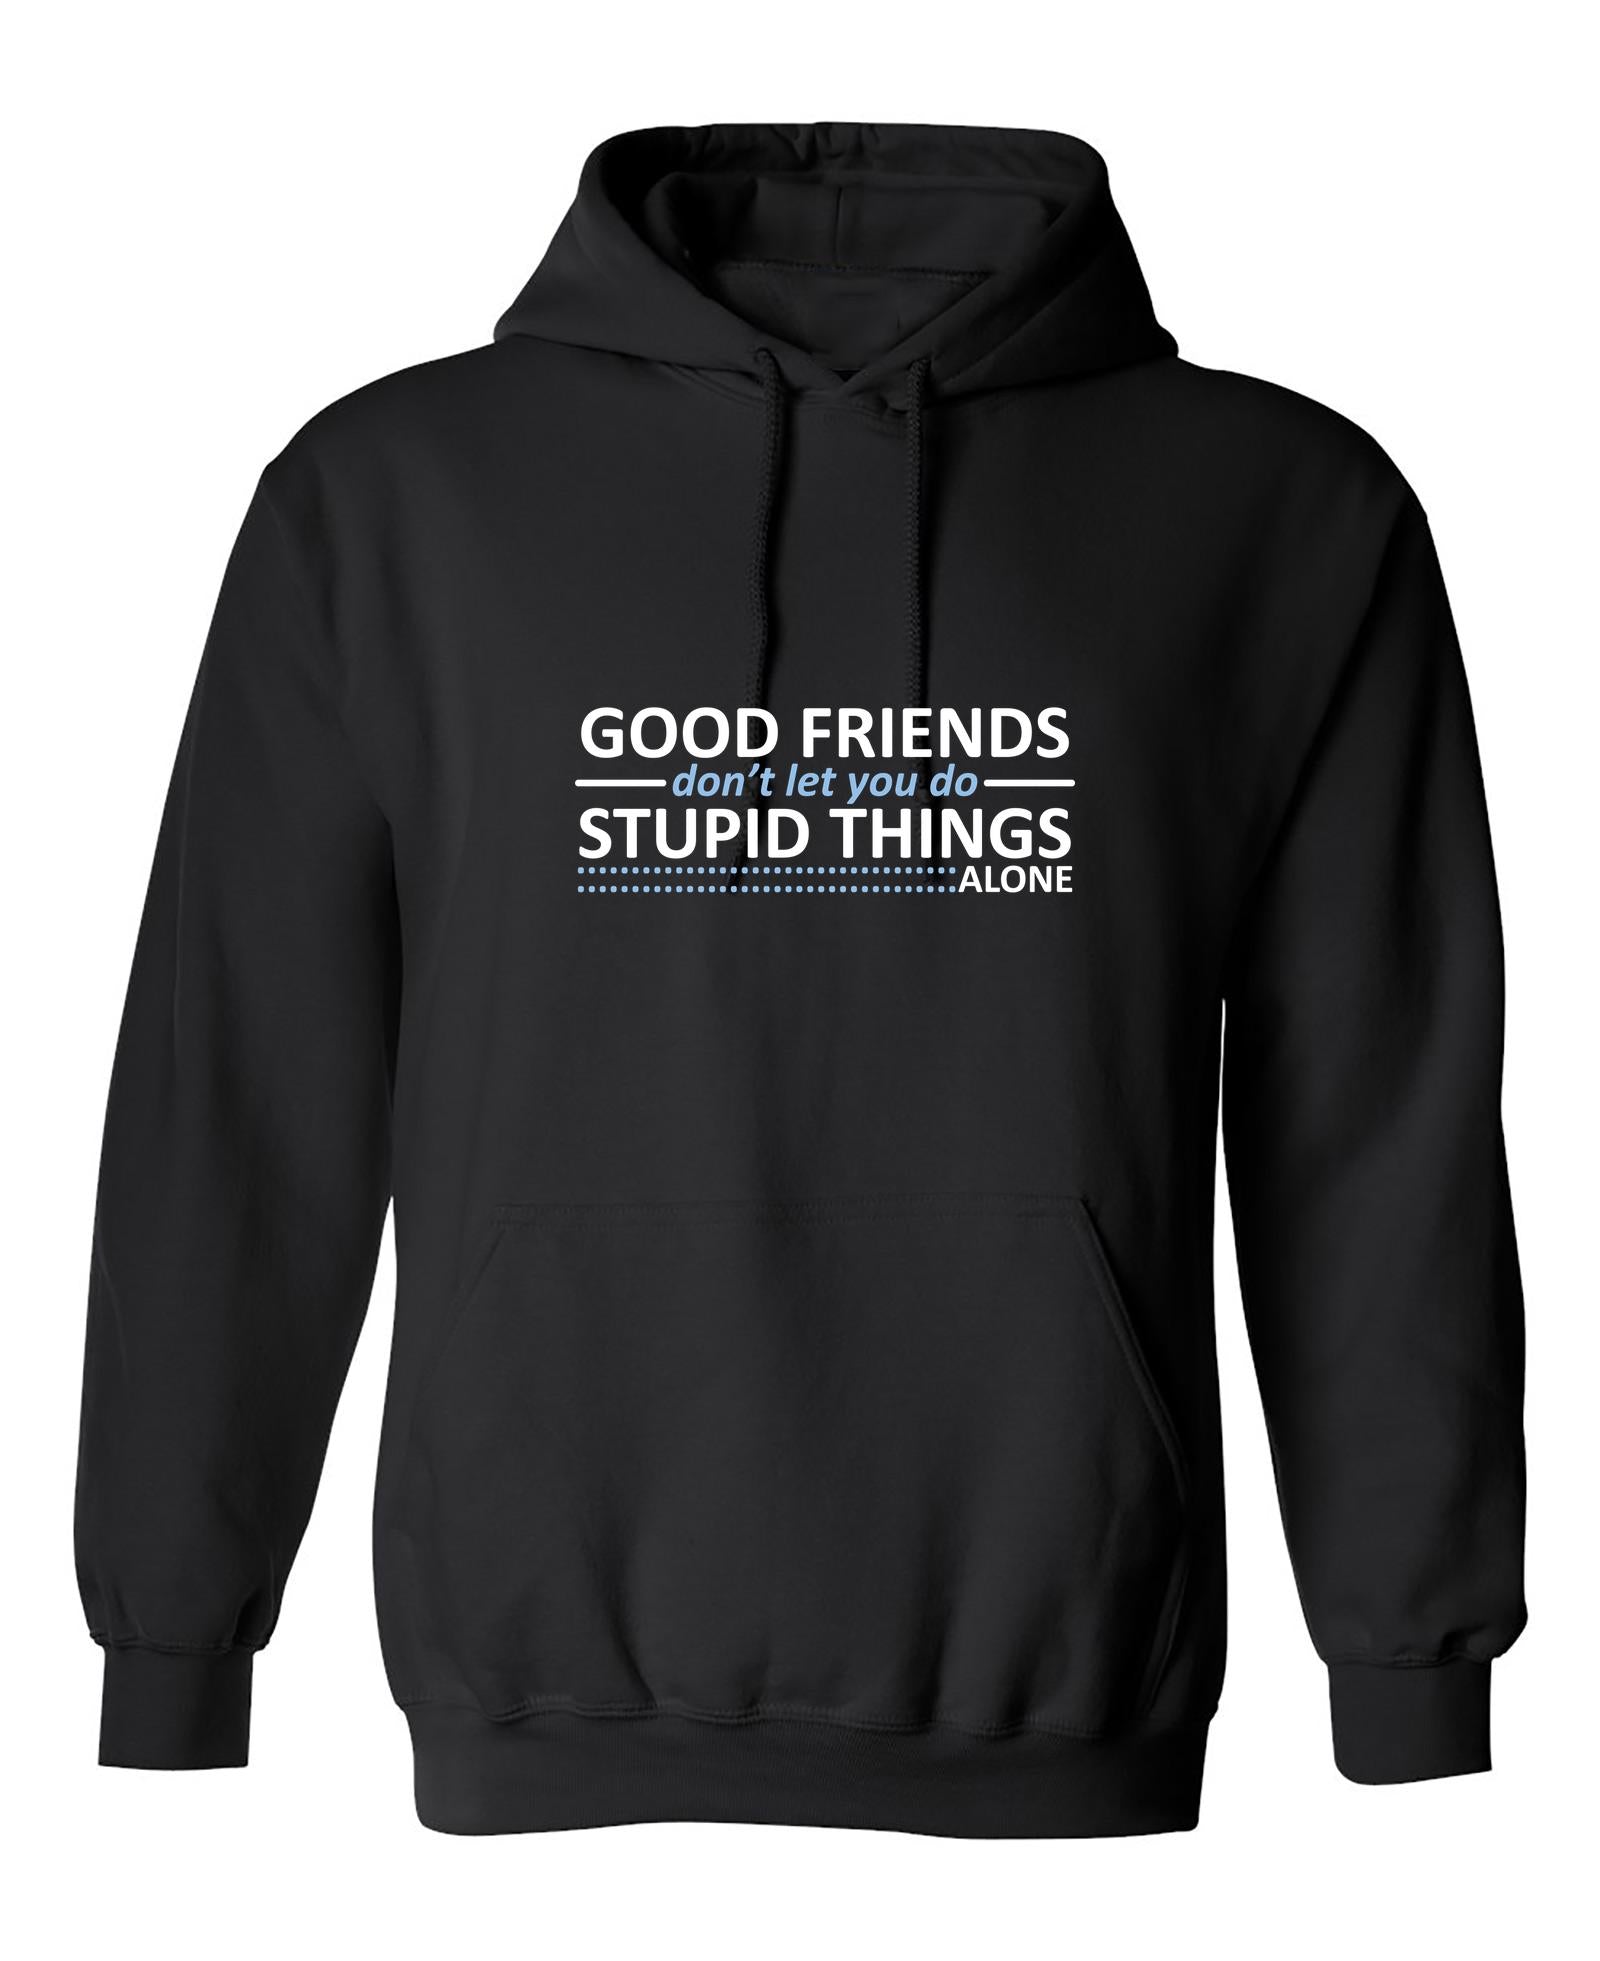 Funny T-Shirts design "Good Friends Don't Let You Do Stupid Things Alone"